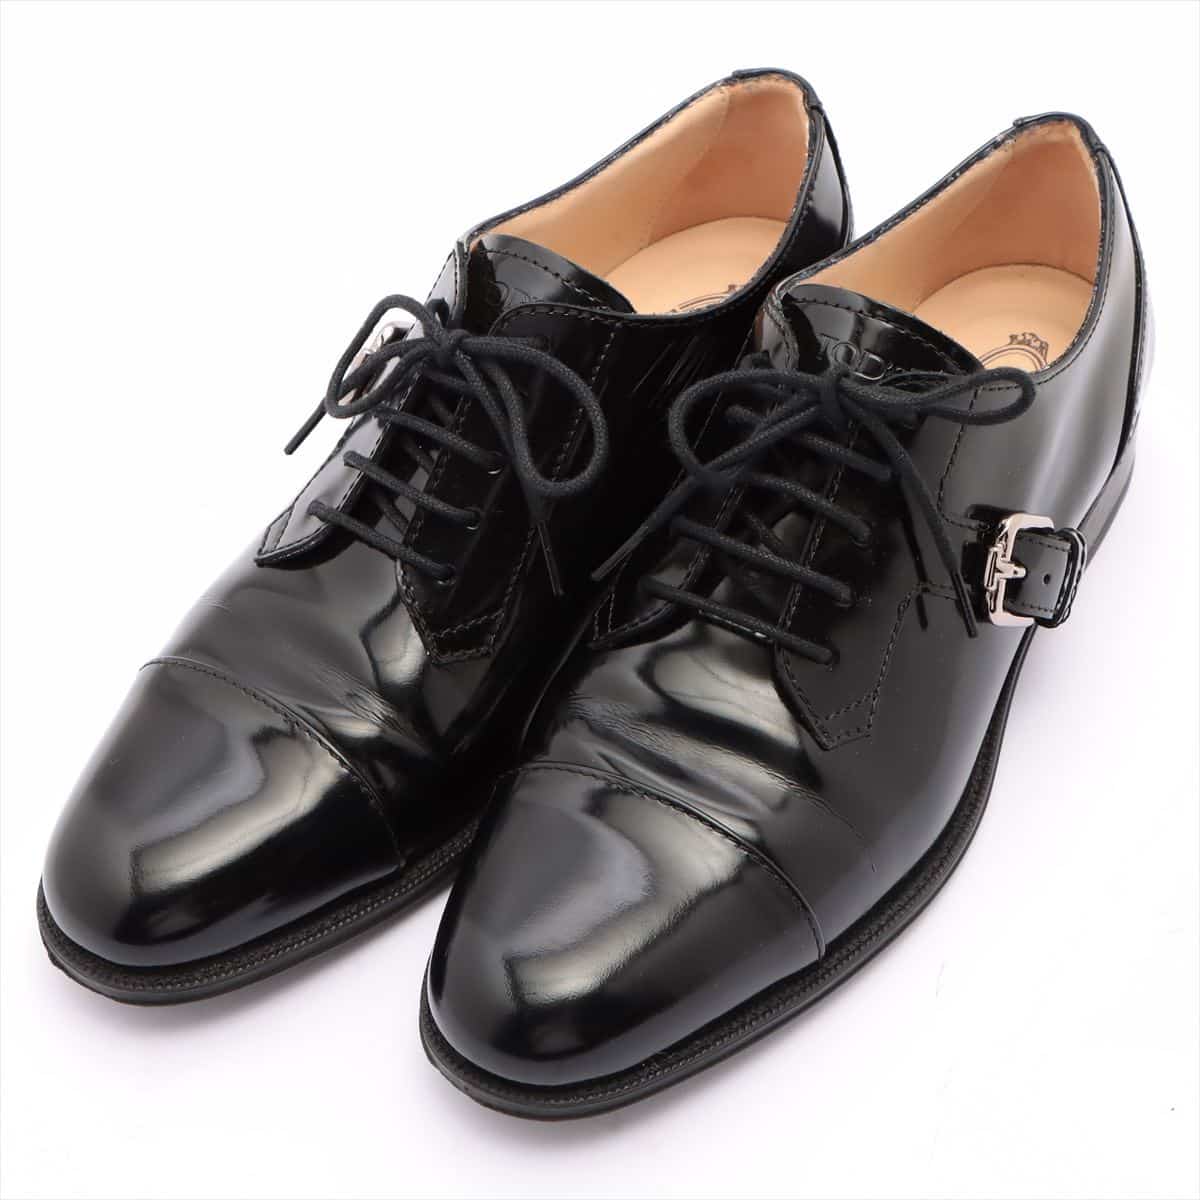 Tod's Patent leather Leather shoes 35.5 Ladies' Black